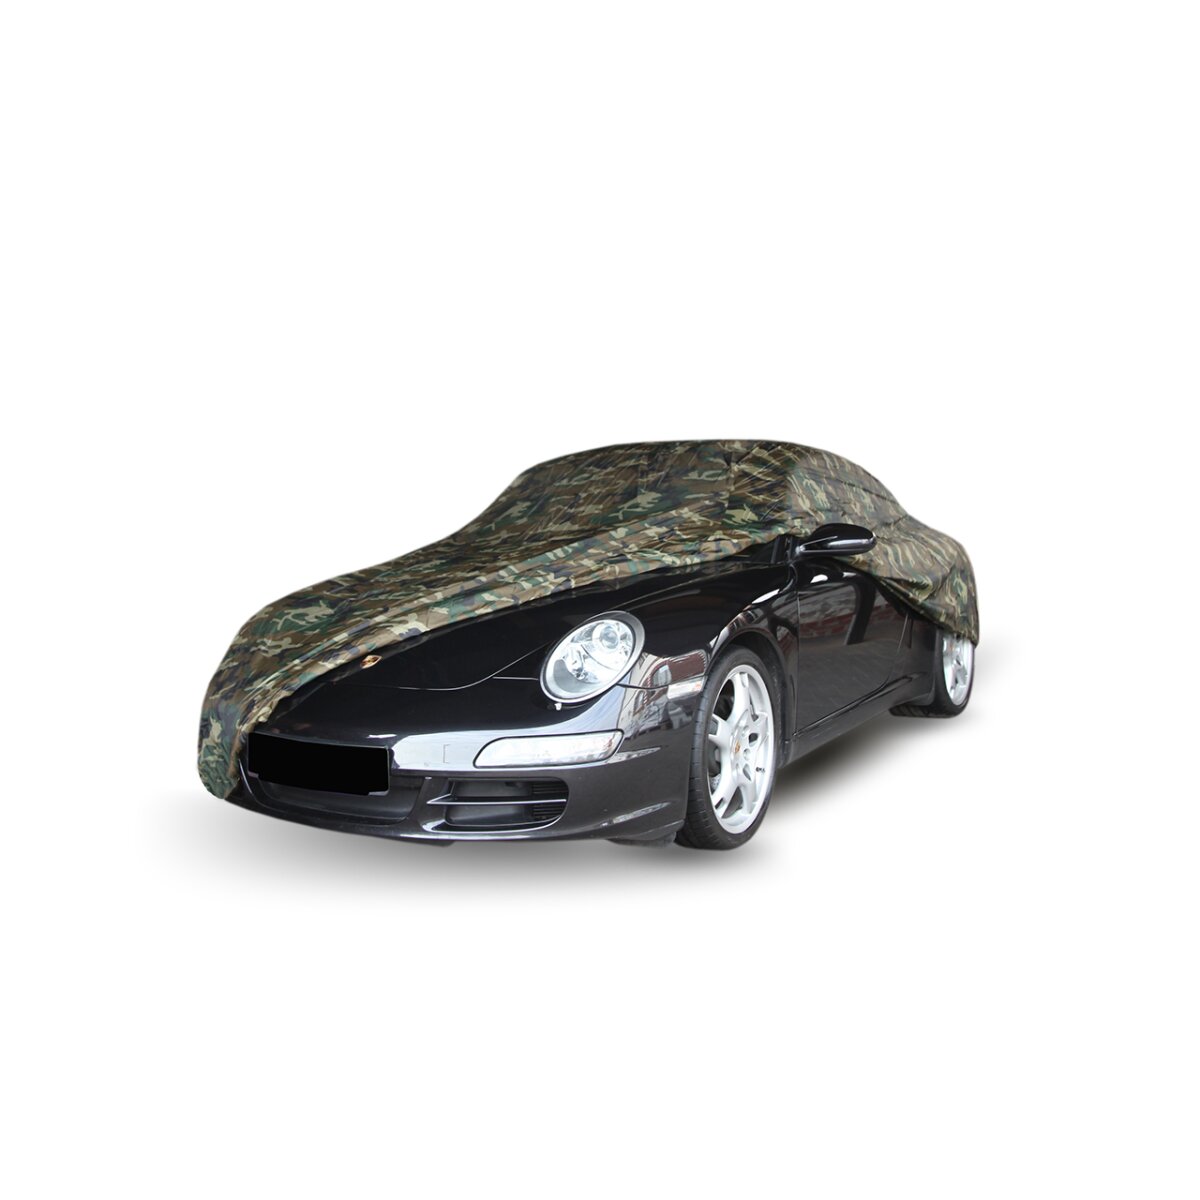 https://www.autoabdeckung.com/media/image/product/11494/lg/autoabdeckung-car-cover-camouflage-fuer-audi-a3-limousine-8y.jpg